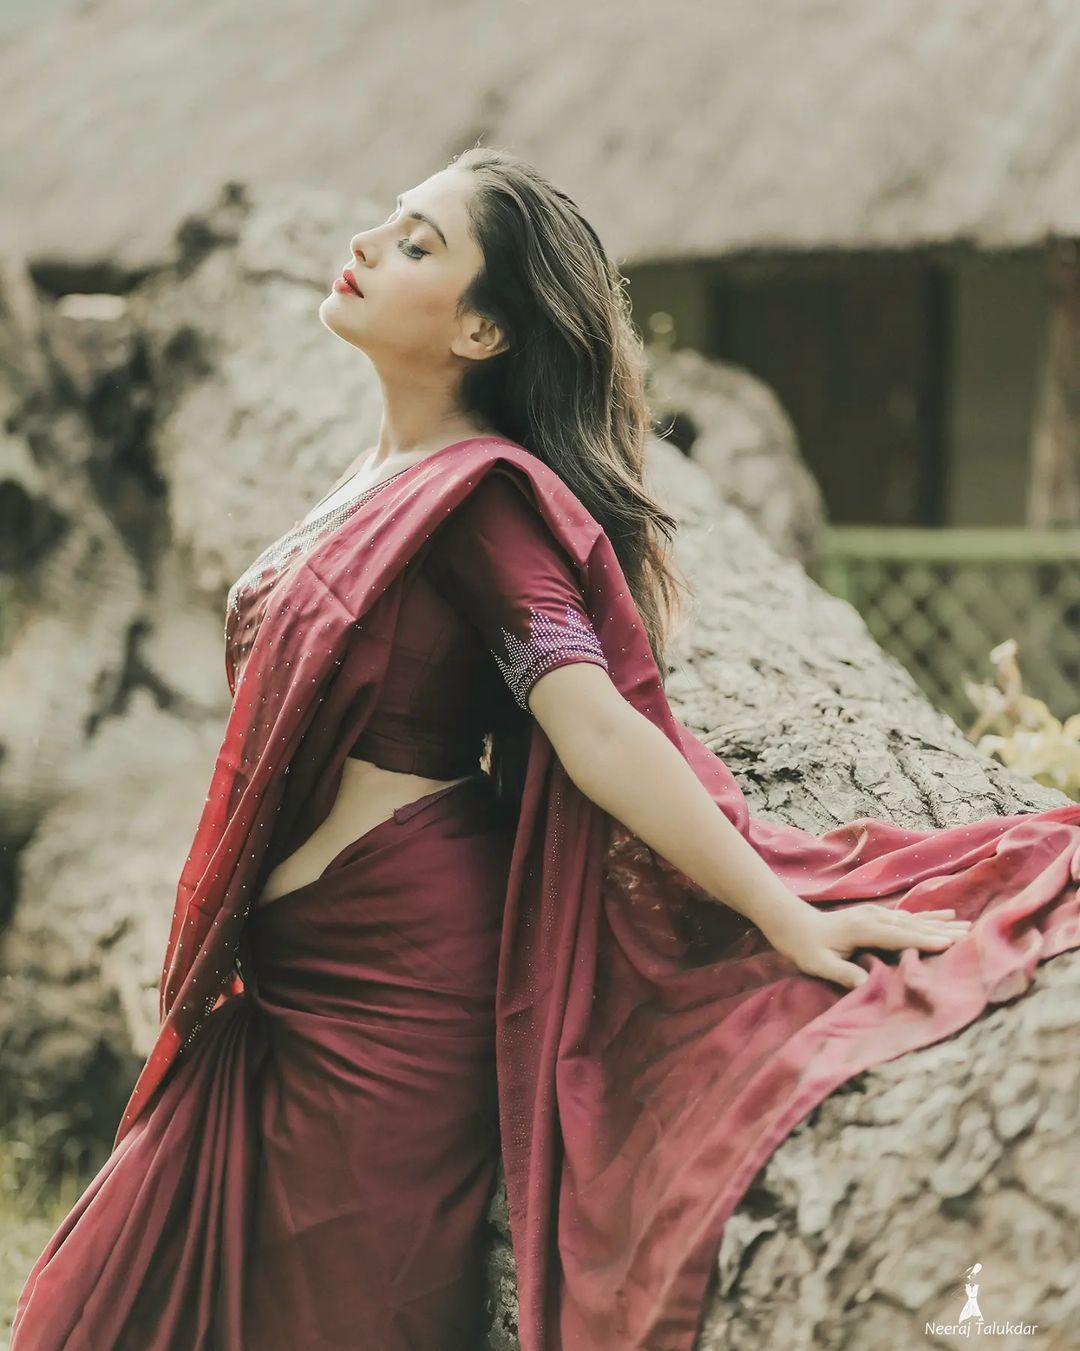 999+ Saree Photoshoot Pictures | Download Free Images on Unsplash